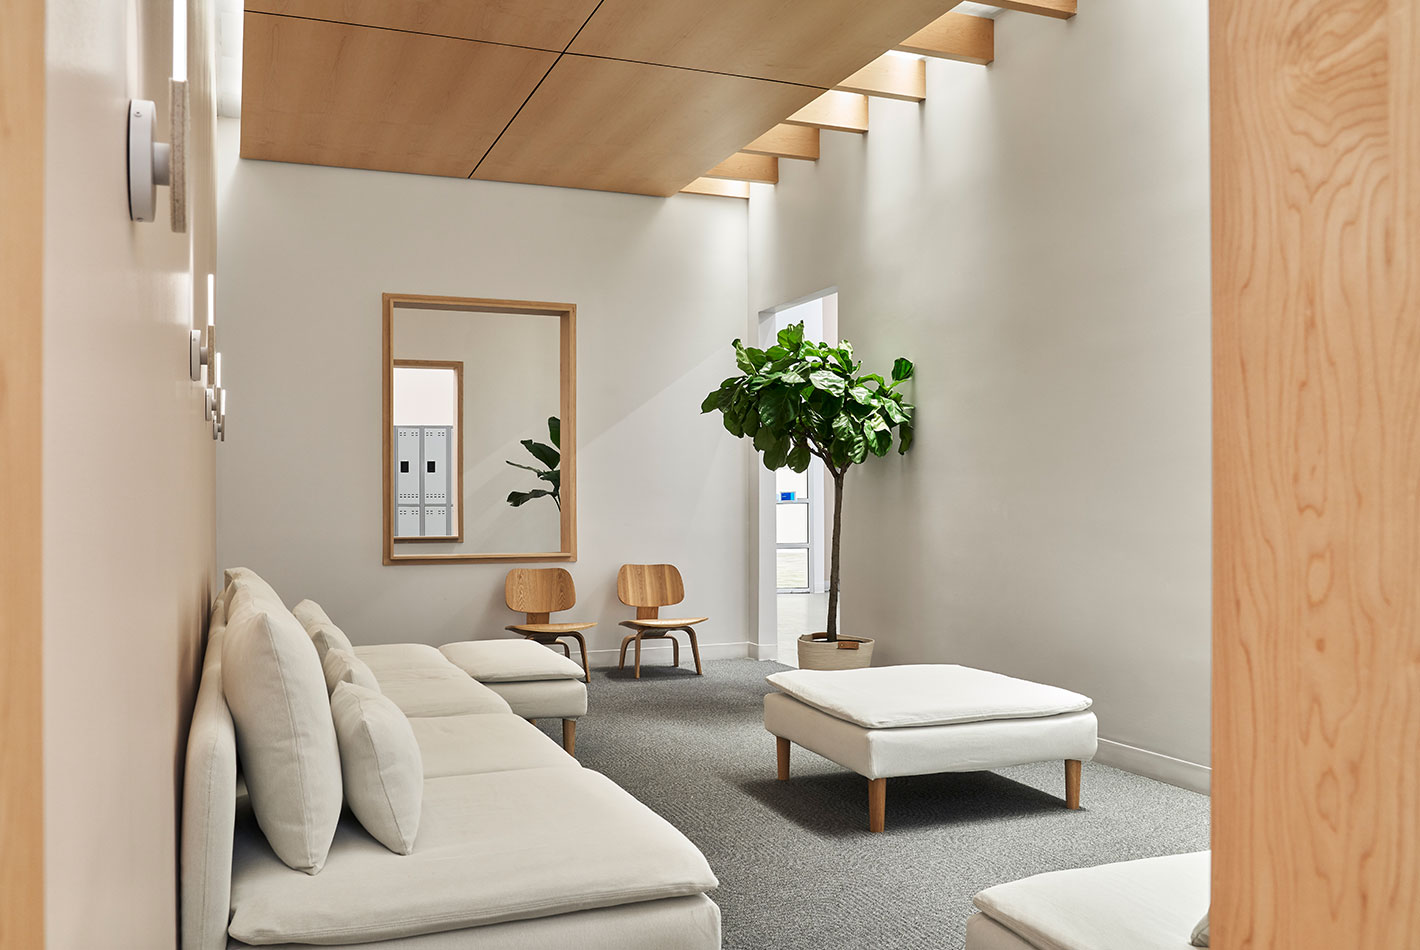 Modern furniture is arranged around a casual conference space, which features a wood paneled ceiling above crisp white walls. Houseplants soften the space.